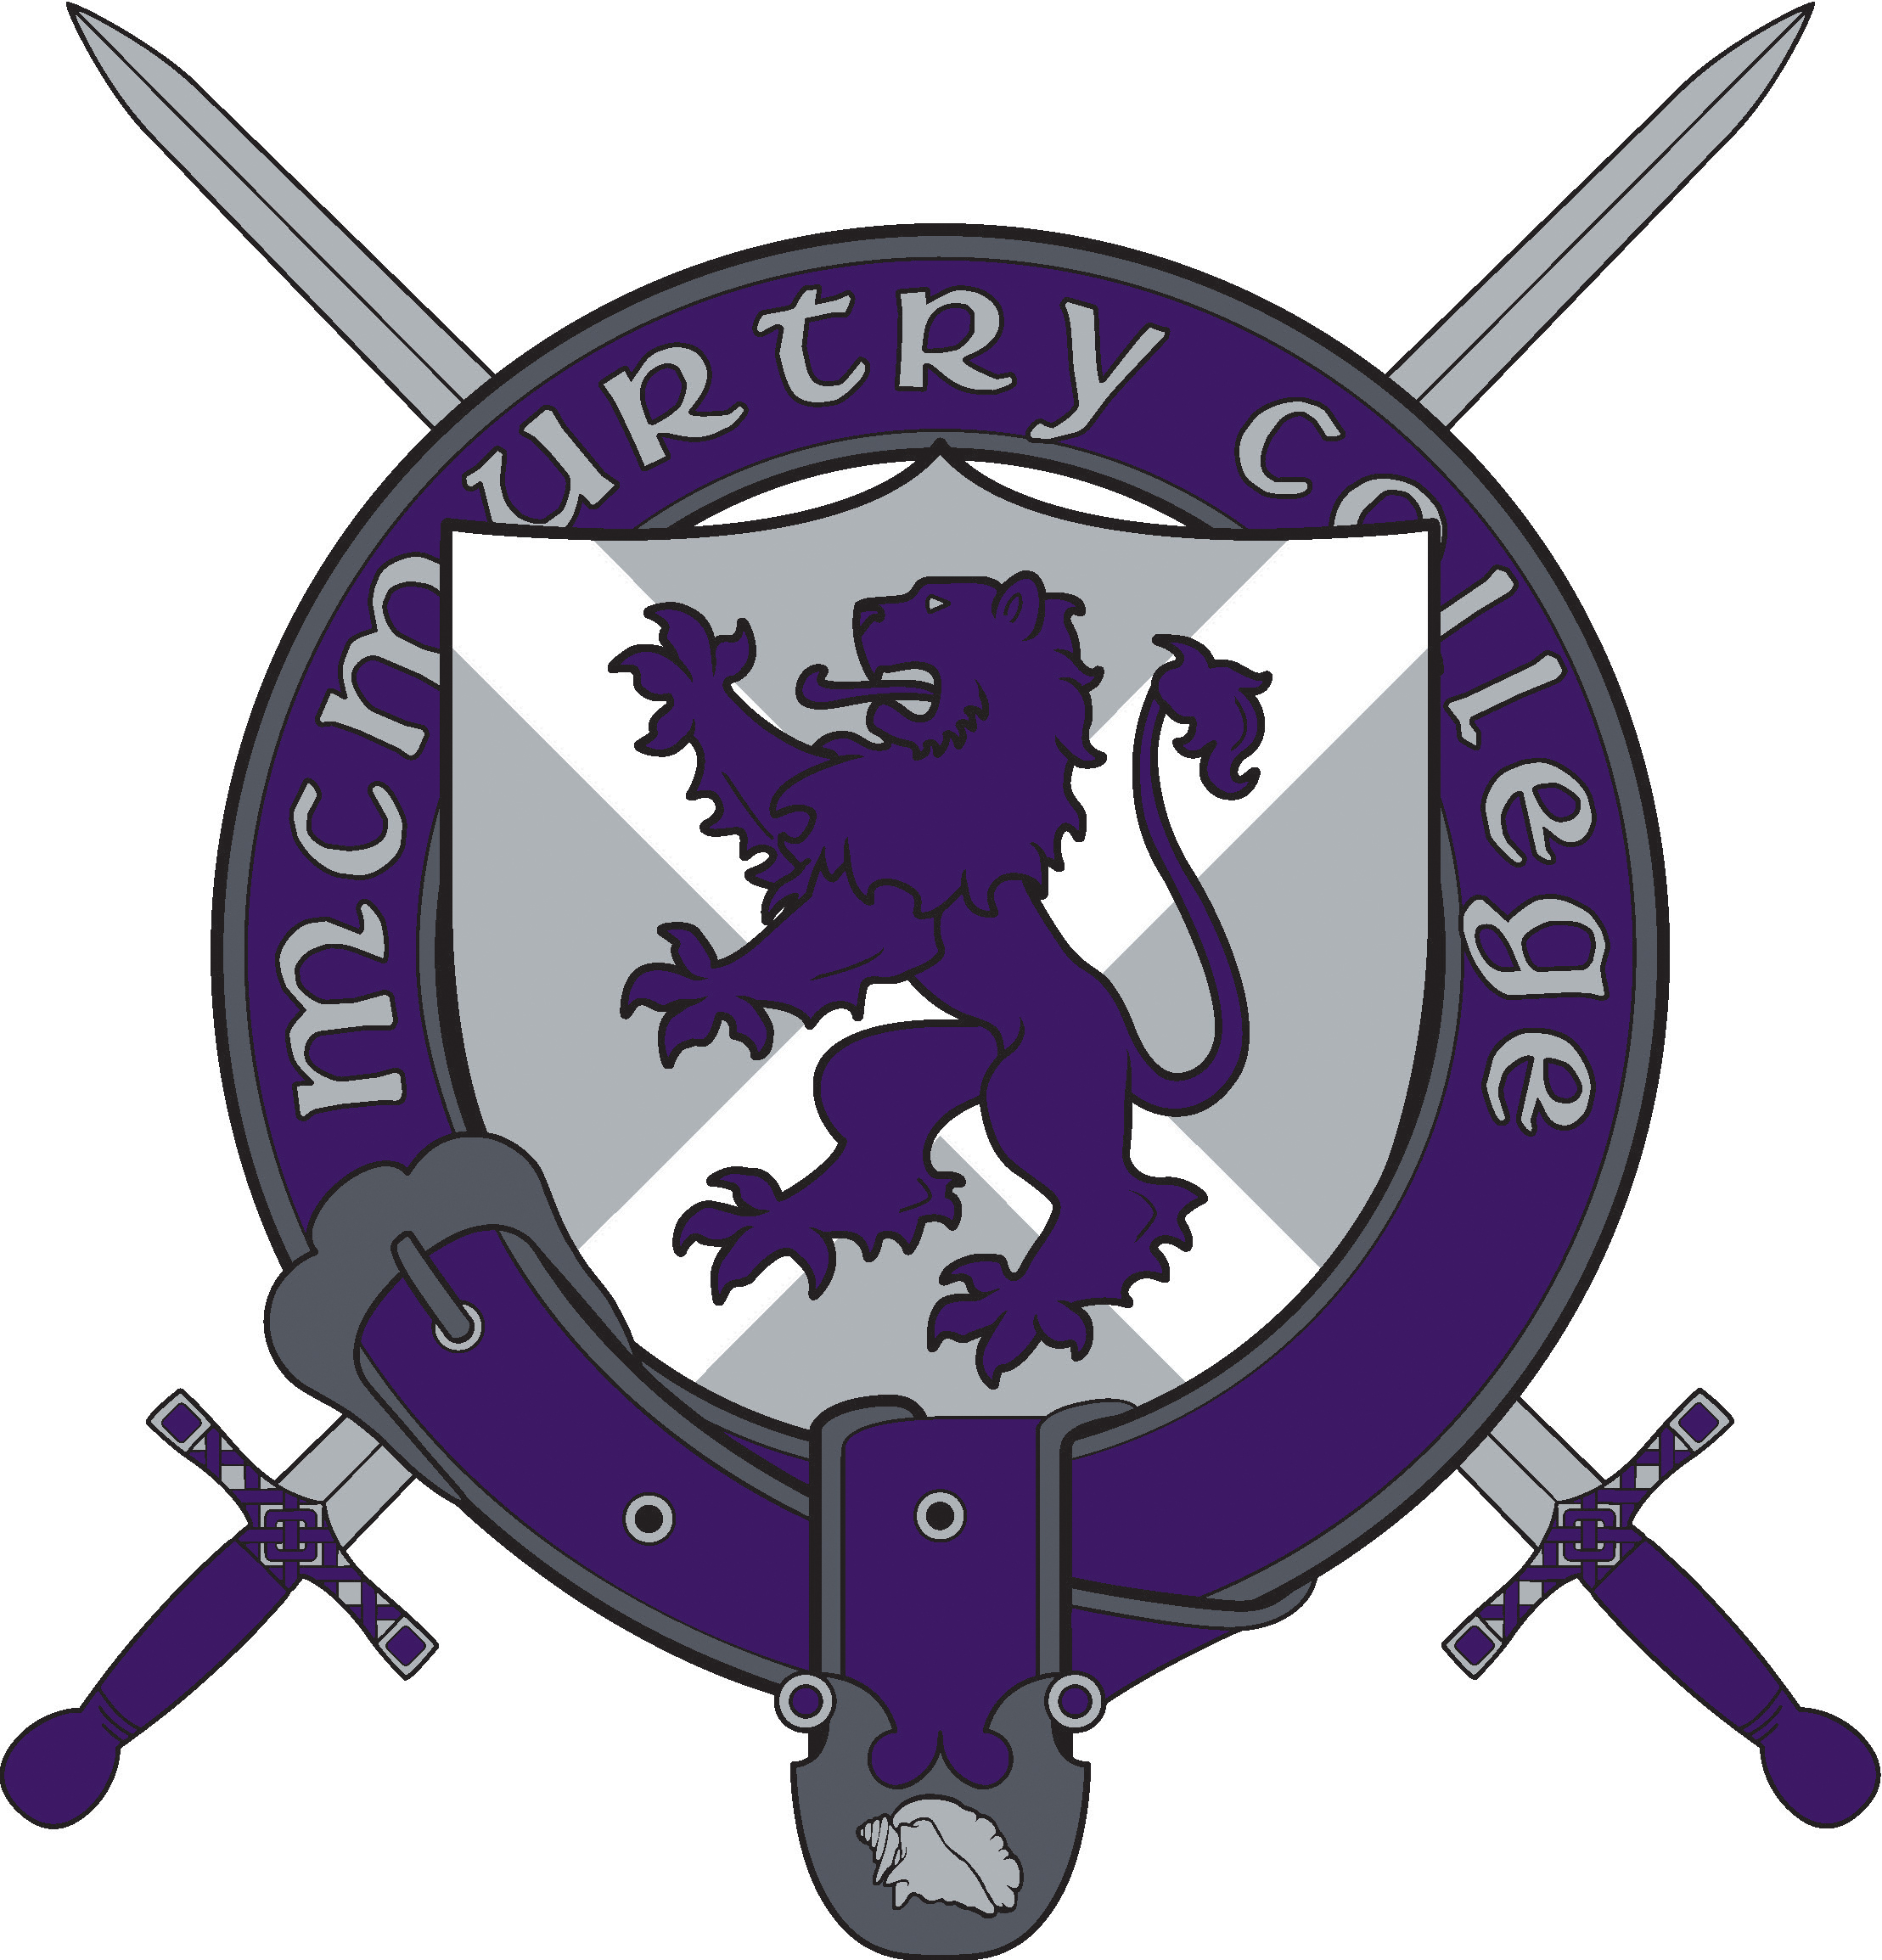 McMurtry College Crest